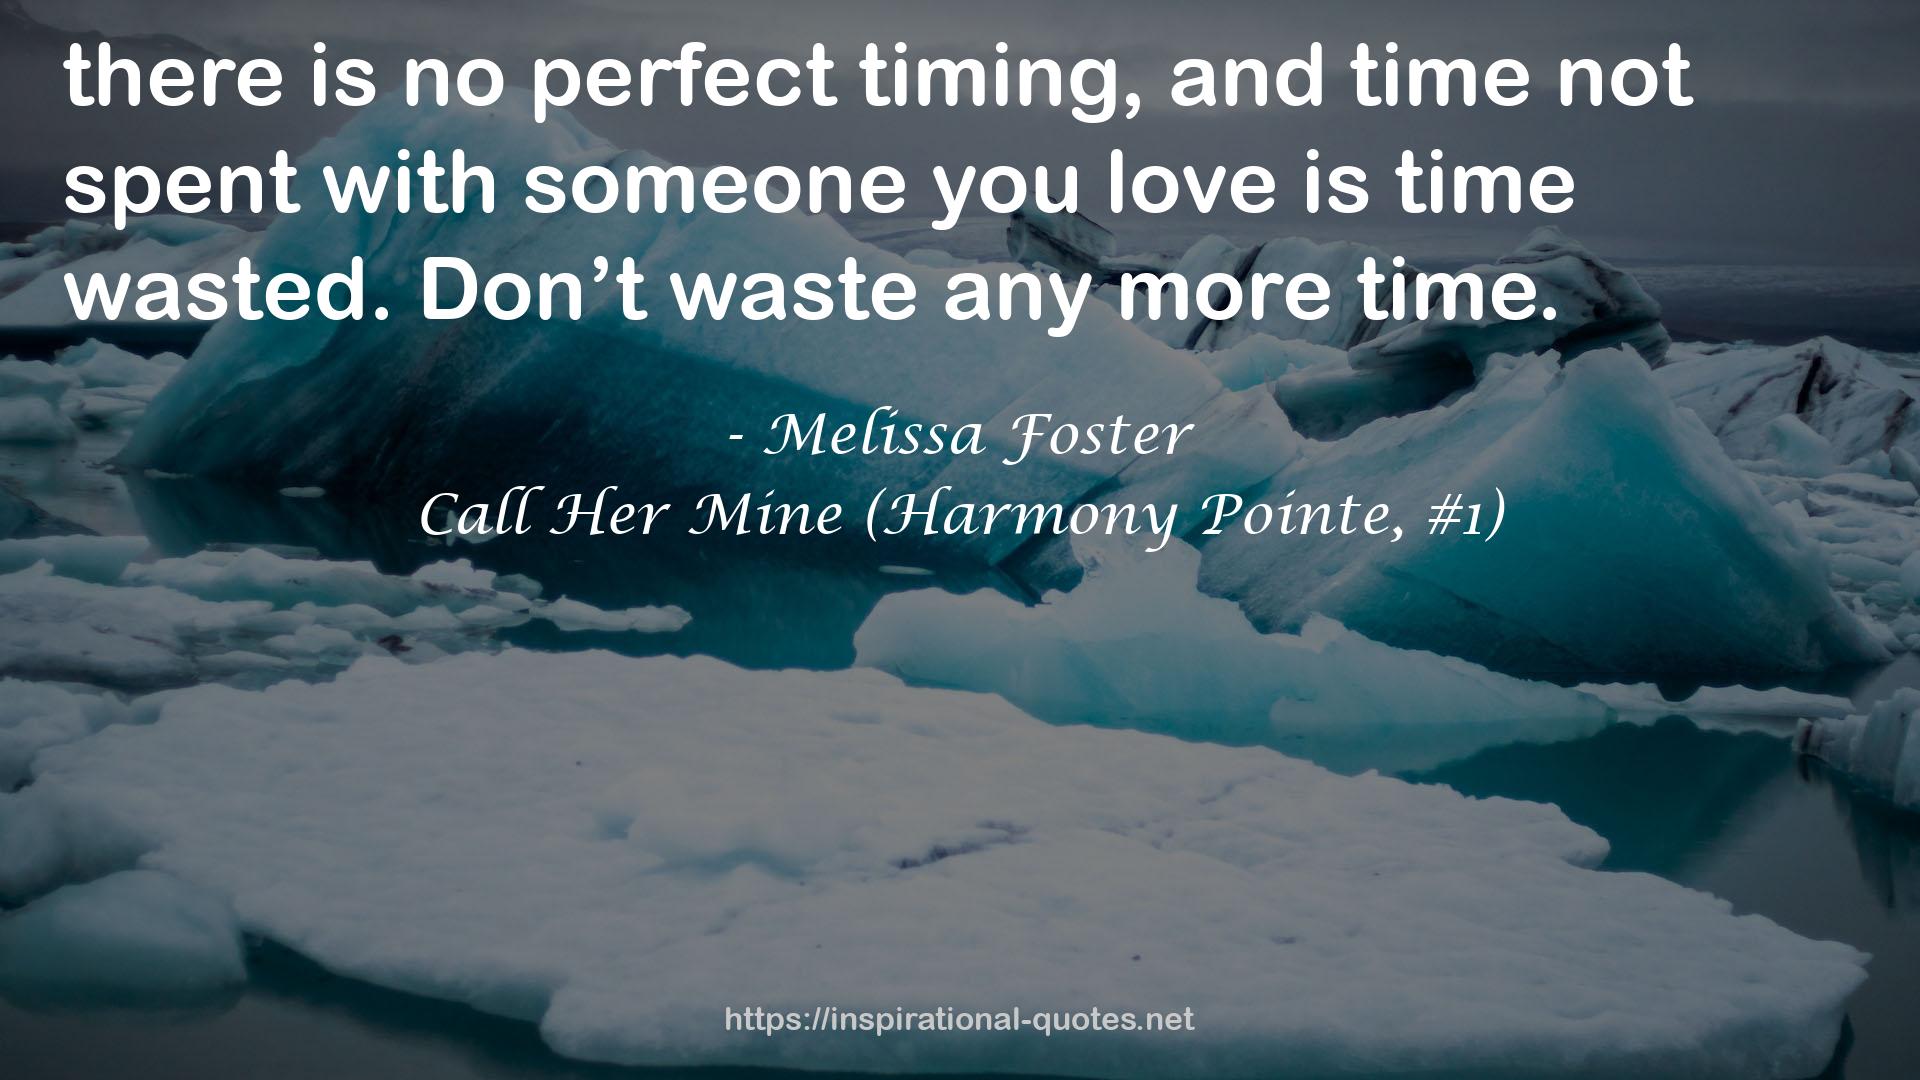 Call Her Mine (Harmony Pointe, #1) QUOTES